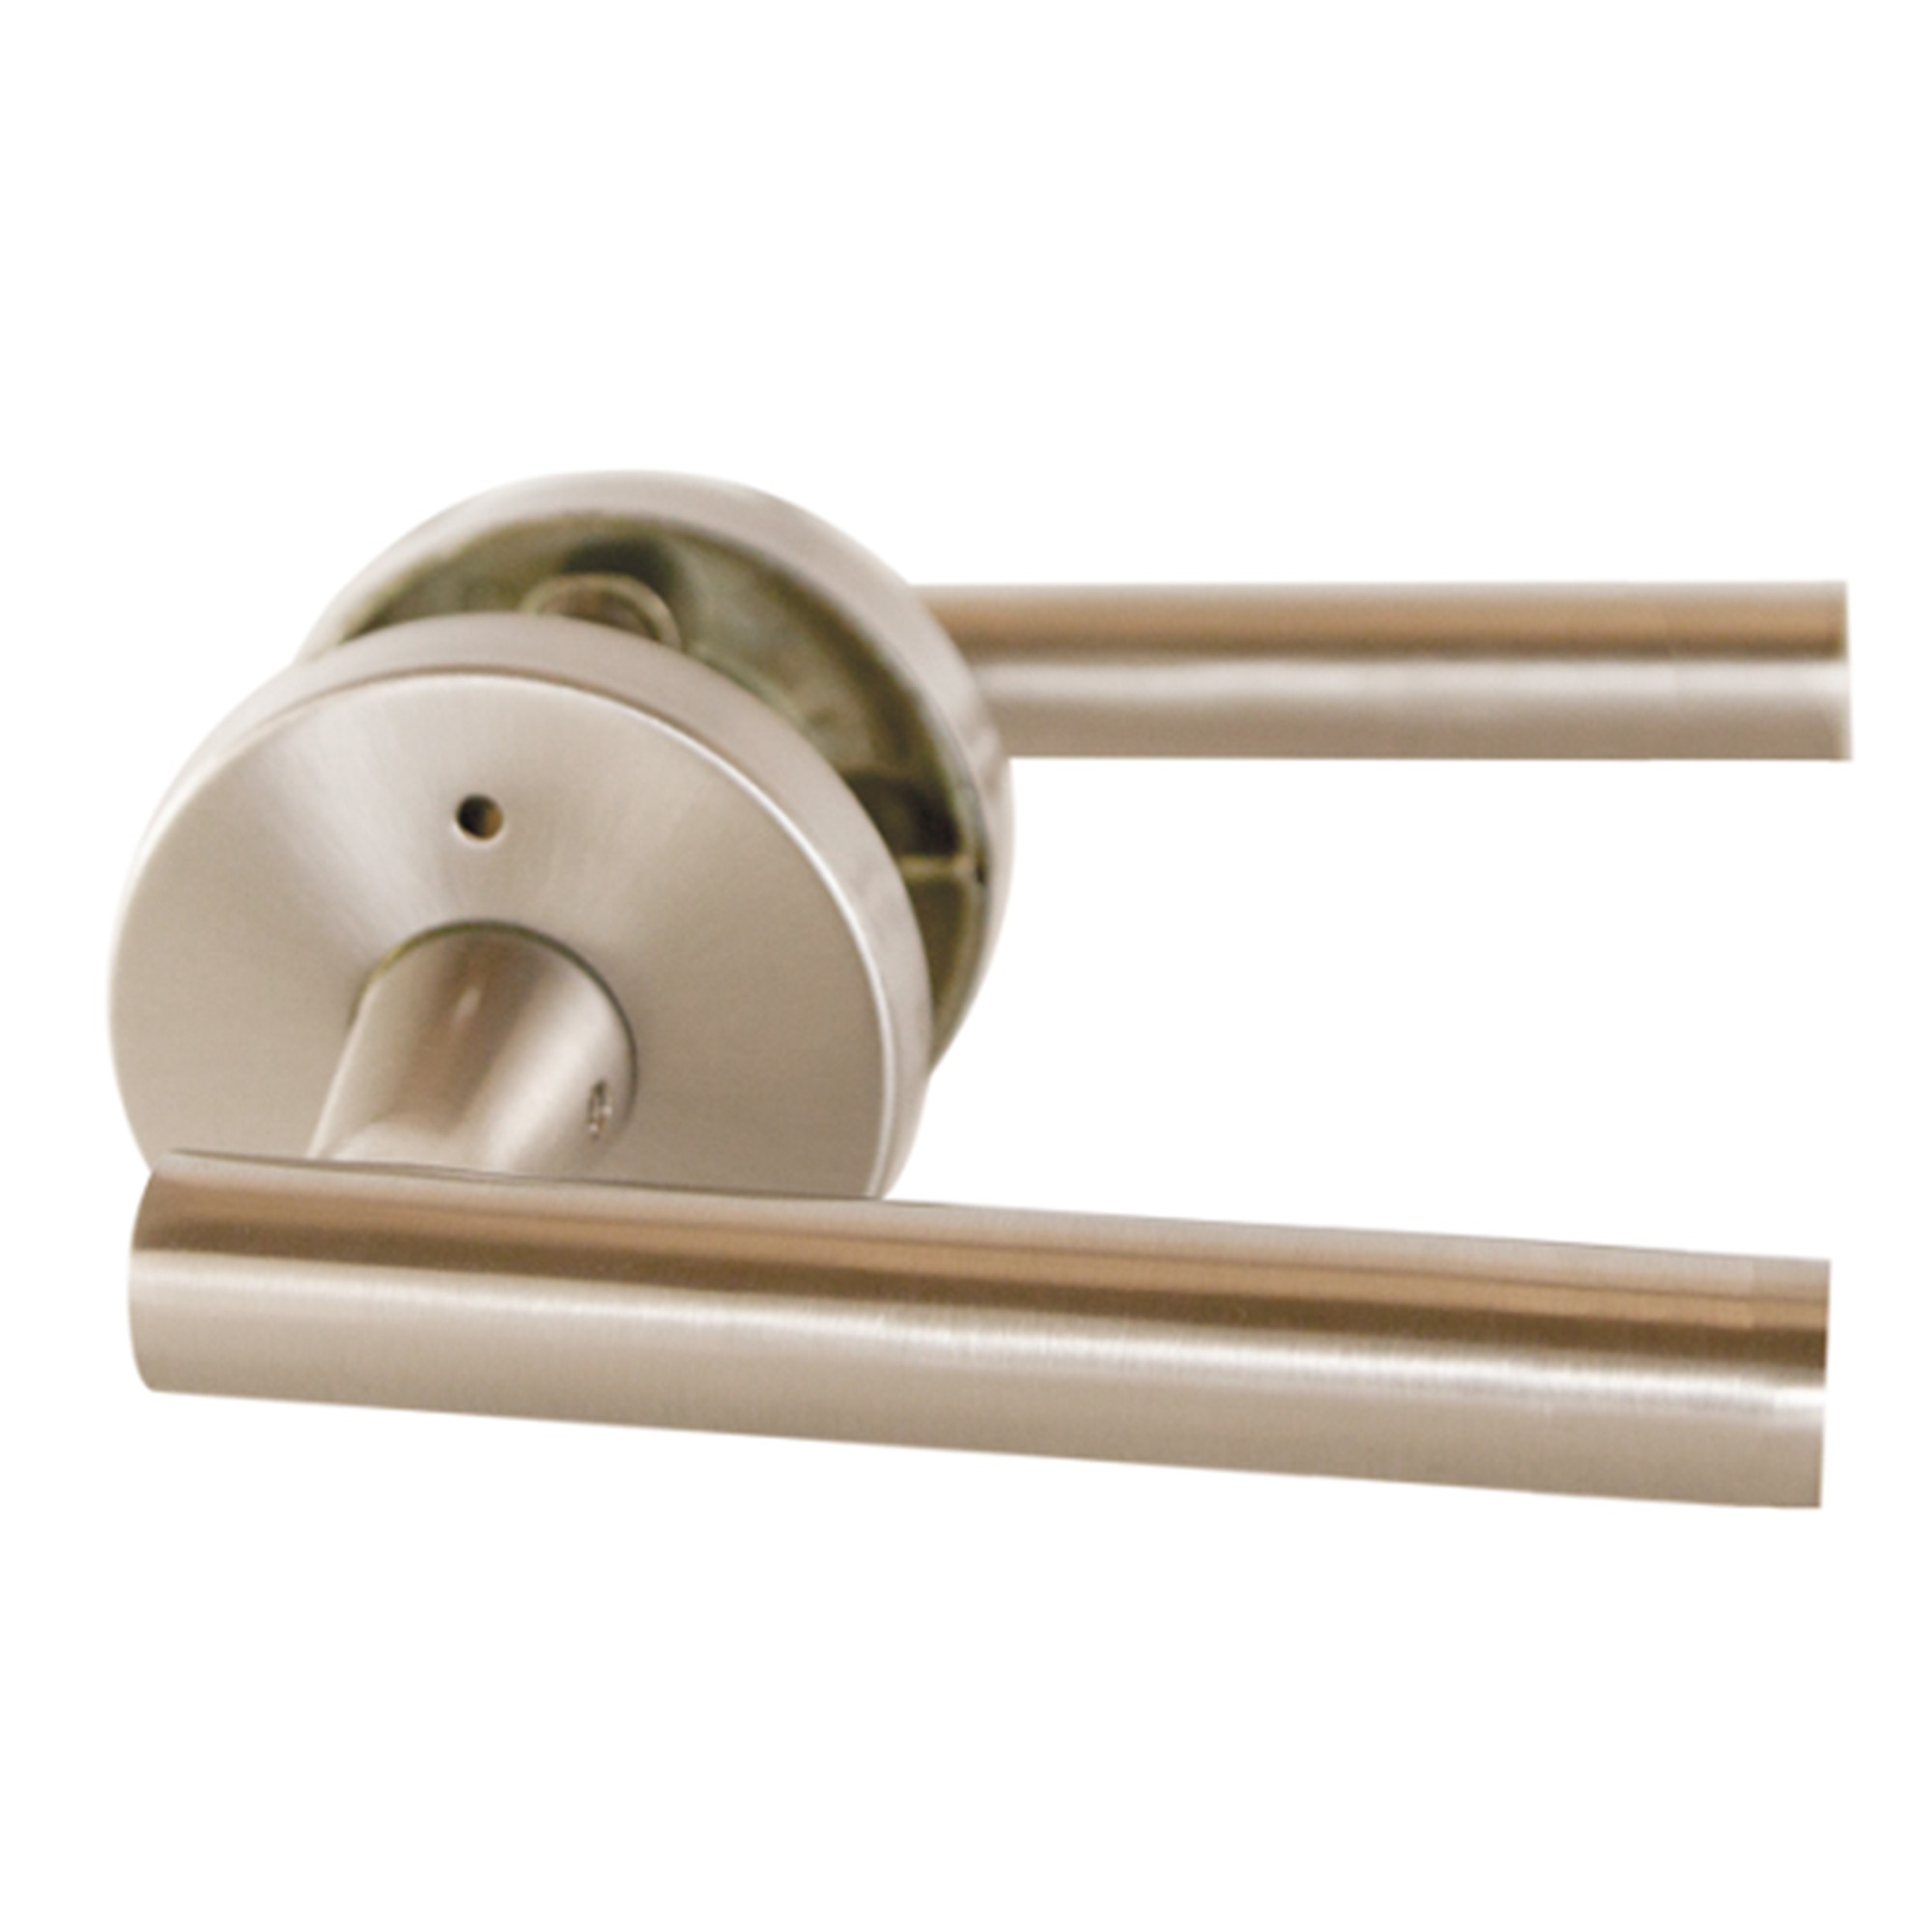 Design House 580969 Eastport Bed and Bath Lever, Reversible for Left or Right Handed Doors, Satin Nickel Finish